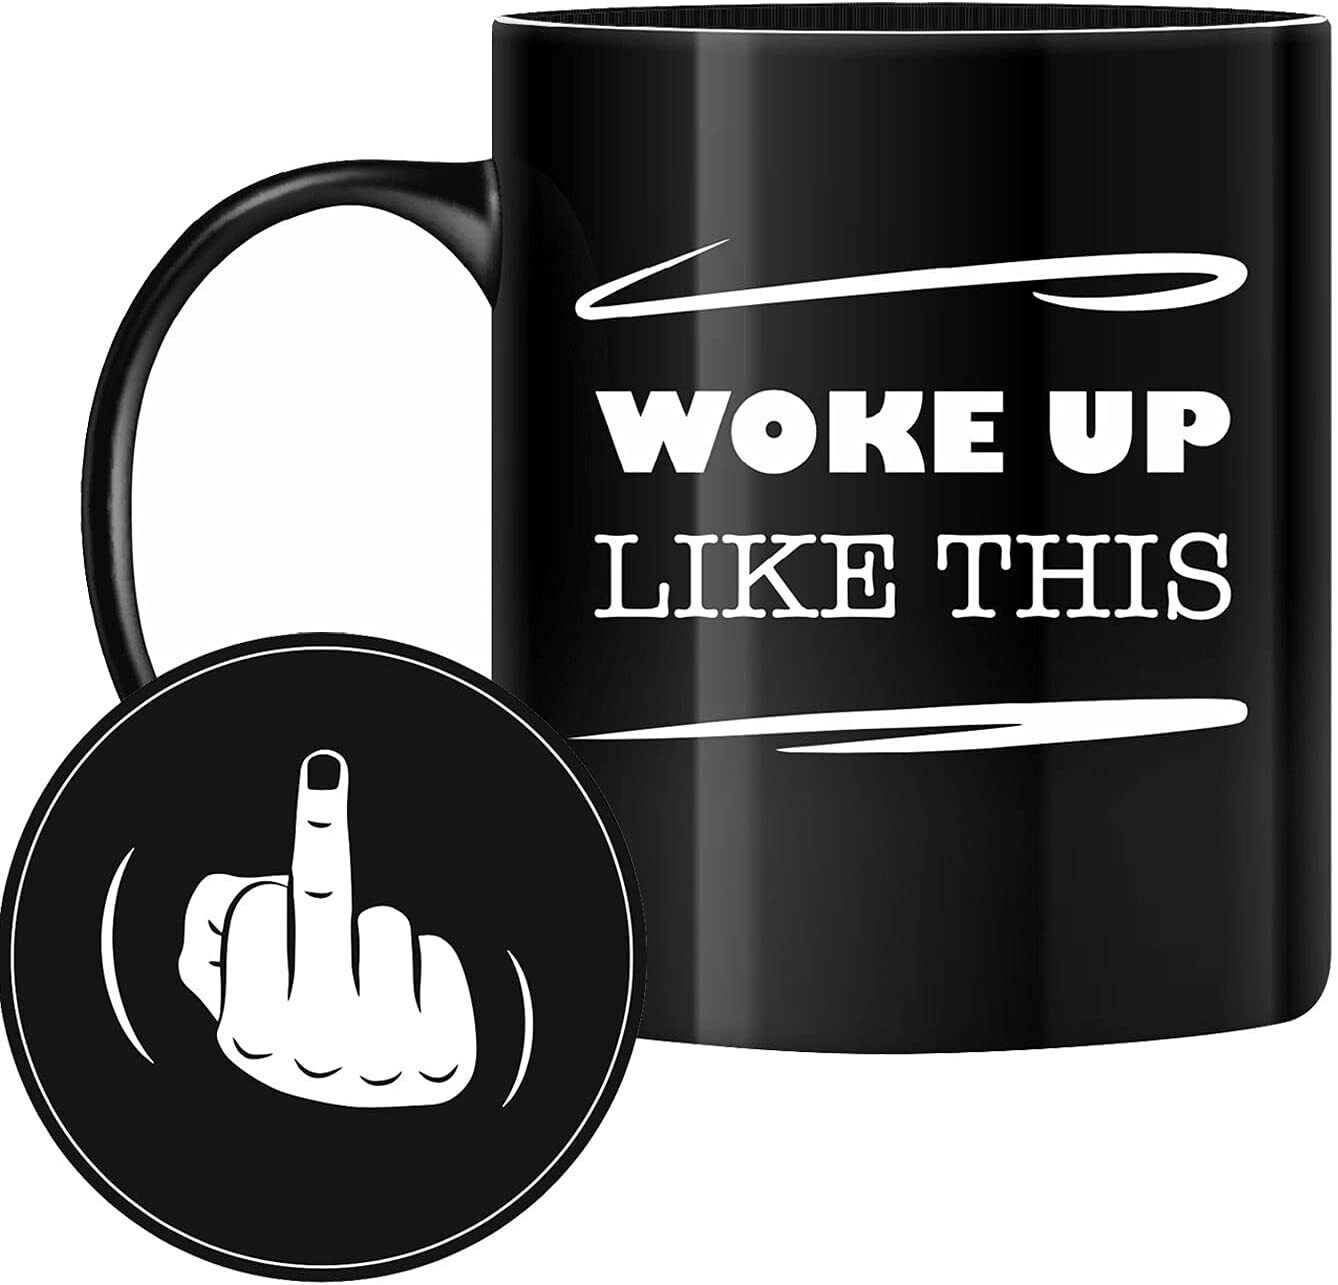 Birthday Gifts Woke Up Like This Funny Coffee Mugs 11 oz, Unique Funny Mugs for